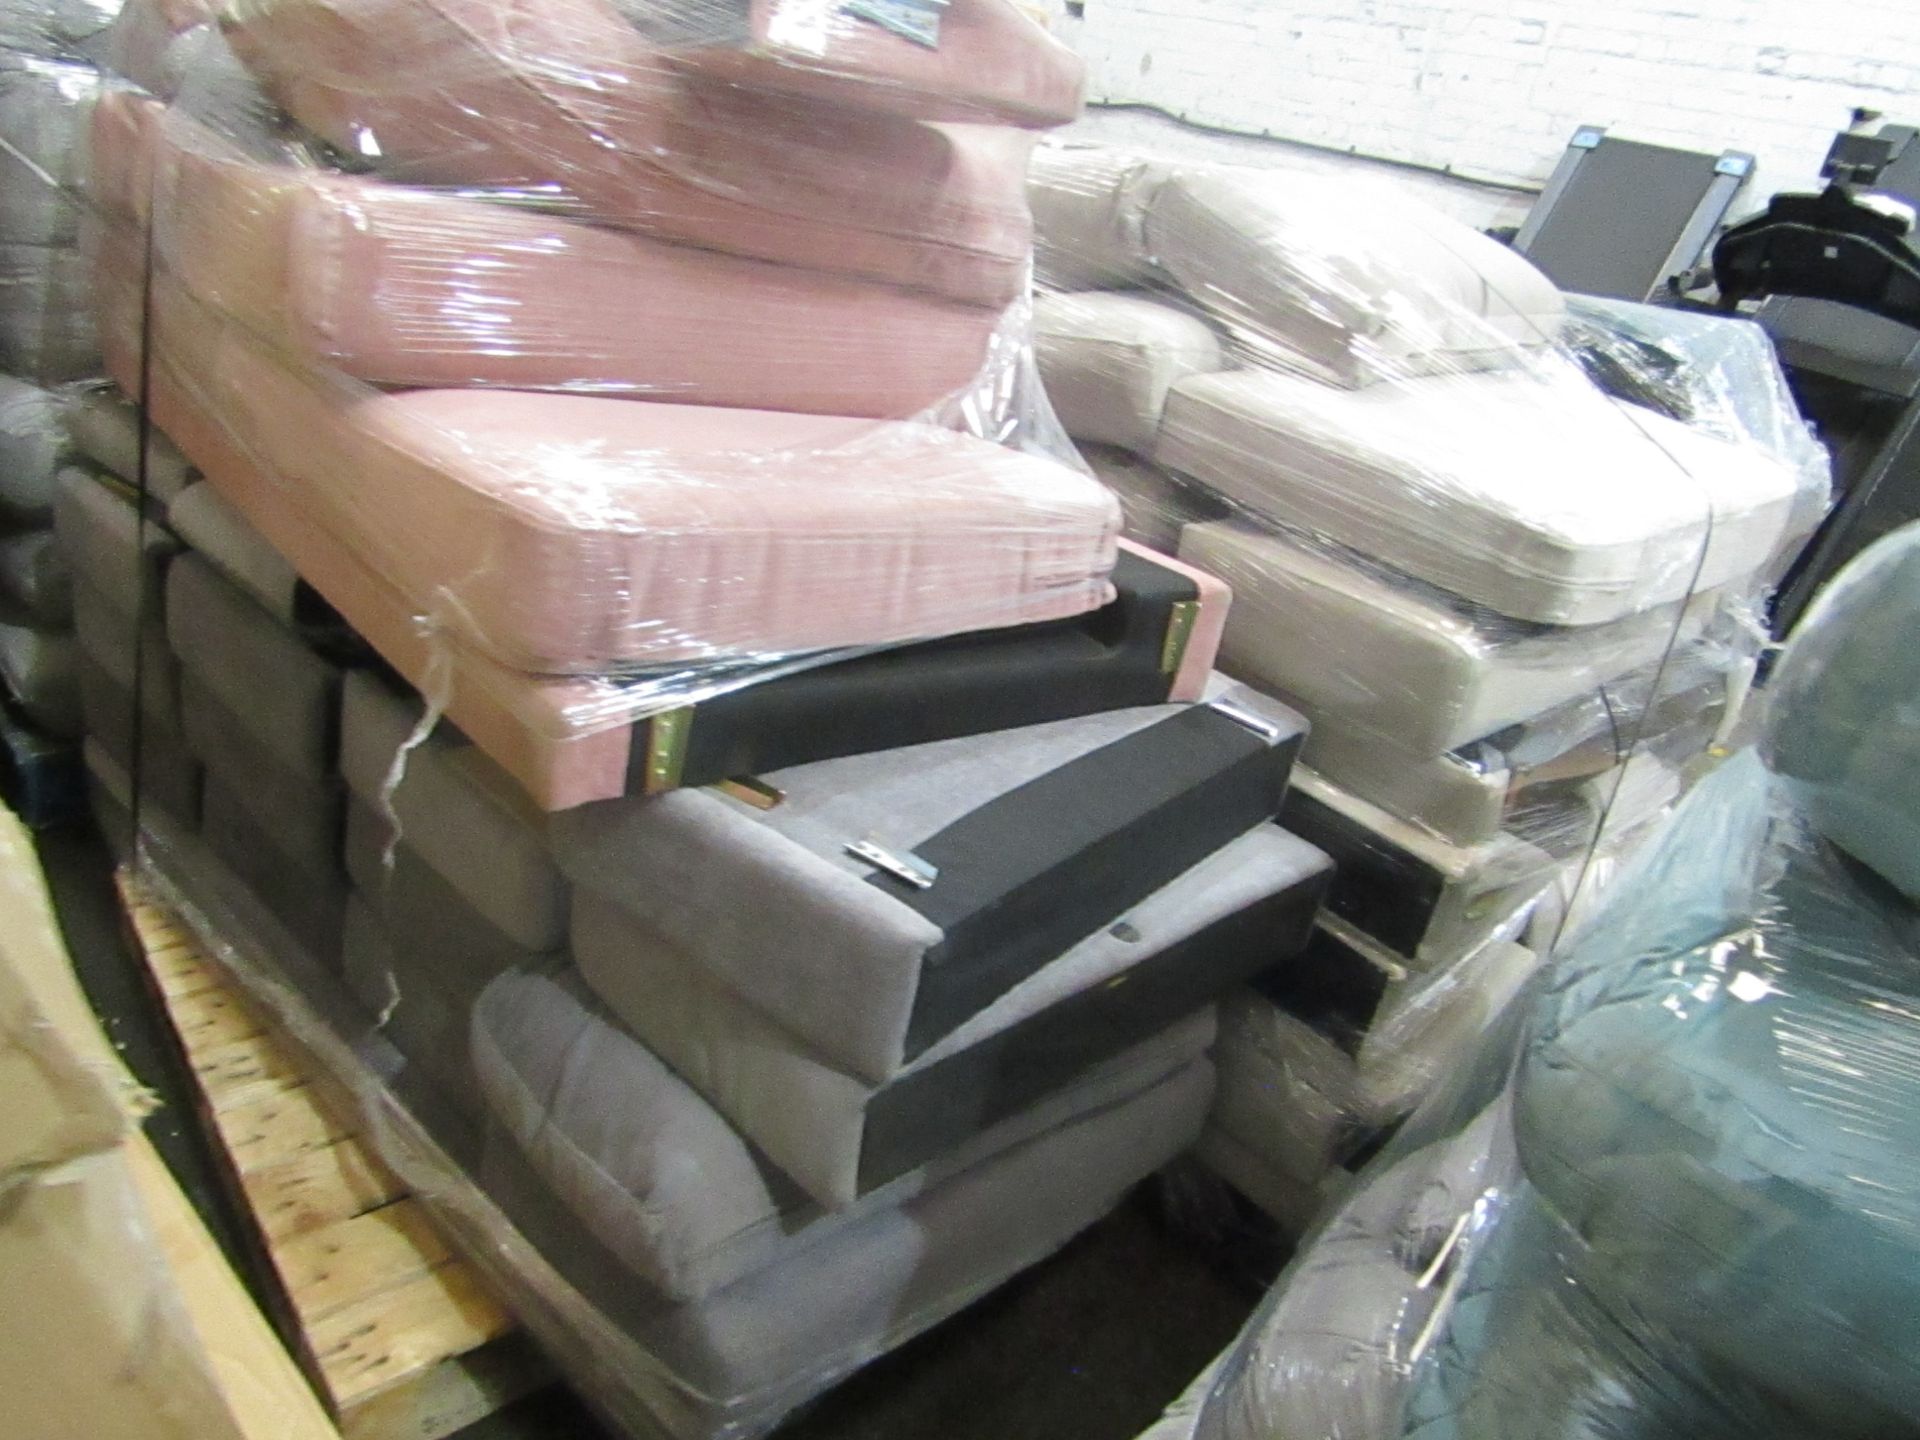 0% Buyers Premium, 24 Pallets of Genuine SNUG SOFA parts - Mixed Lots of Bases Backs Arms Cushions - Image 20 of 20